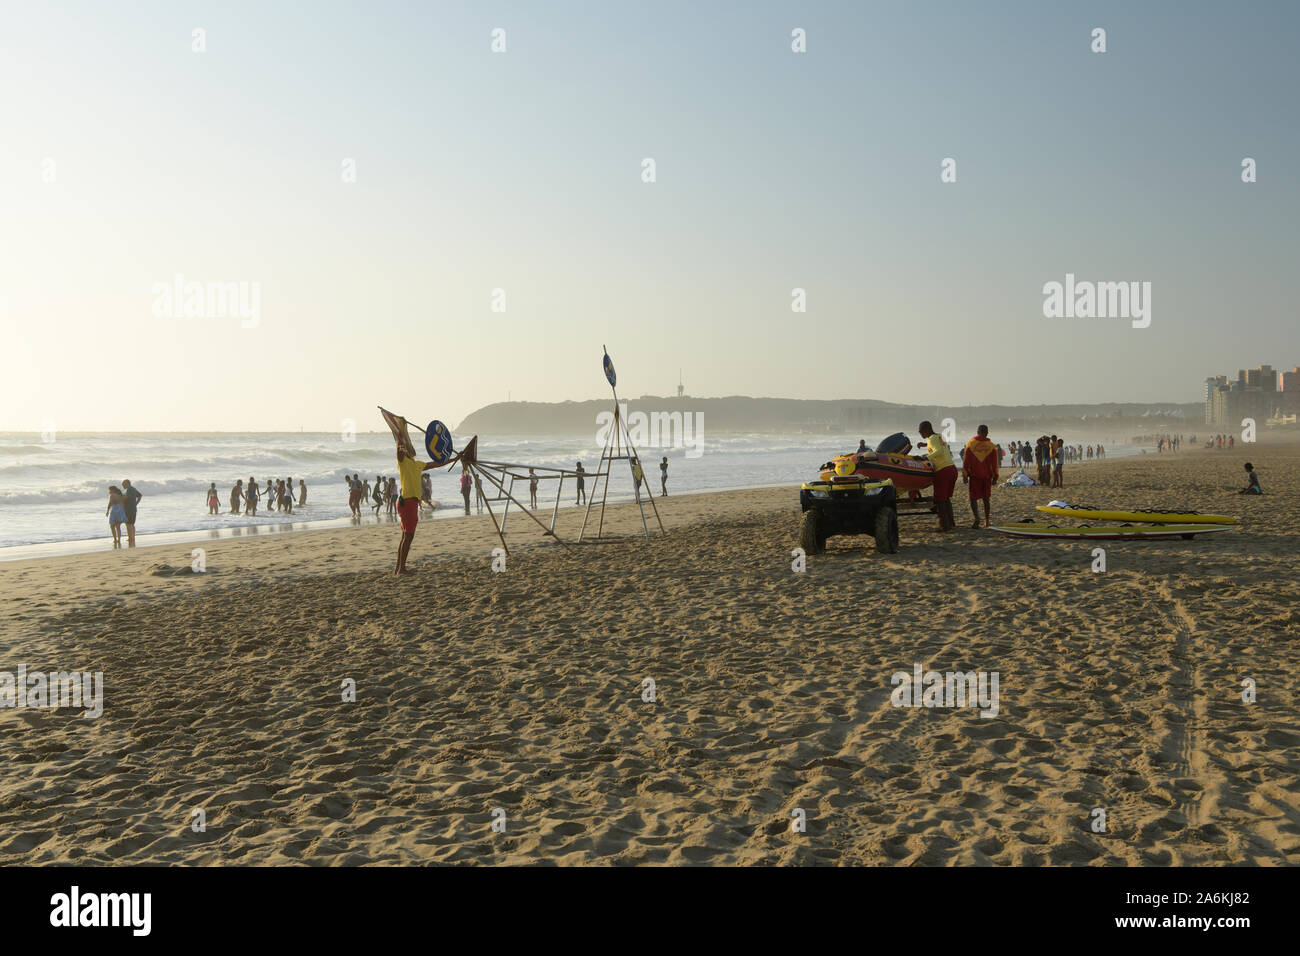 Durban, KwaZulu-Natal, South Africa, landscape, adult male lifeguards preparing equipment on beach for duty, occupations, water safety, drowning Stock Photo